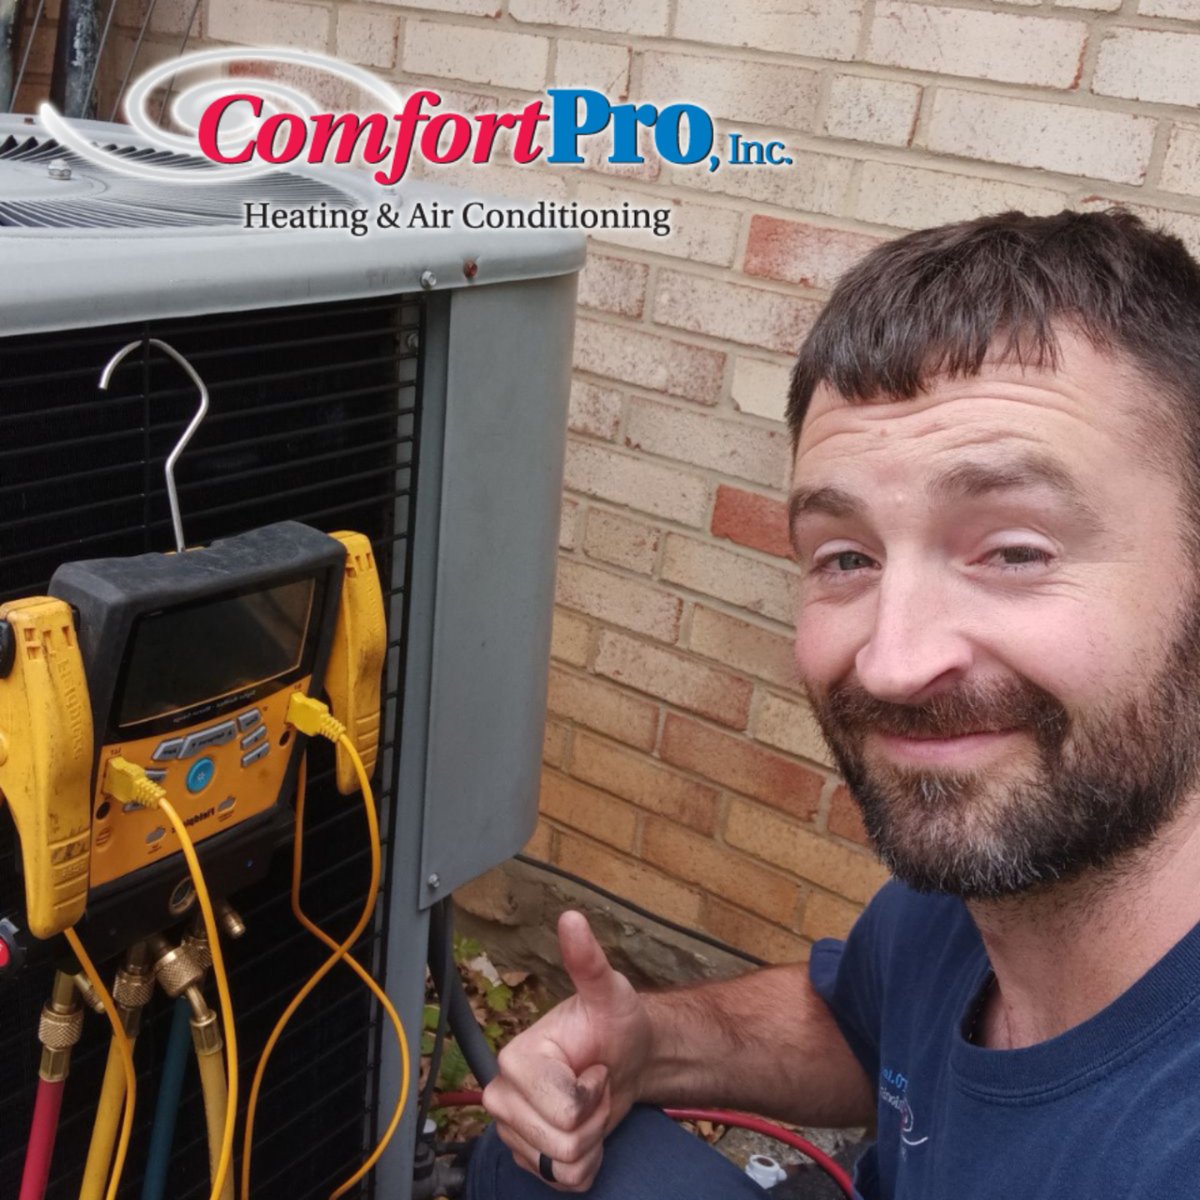 Beat the heat before it's too late! 🌞 Schedule your HVAC maintenance today and enjoy a 17-point precision AC Inspection, ensuring everything from thermostat checks to proper operation tests is completed. Your comfort is our mission! ☎️ #HVACMaintenance #ComfortProInc